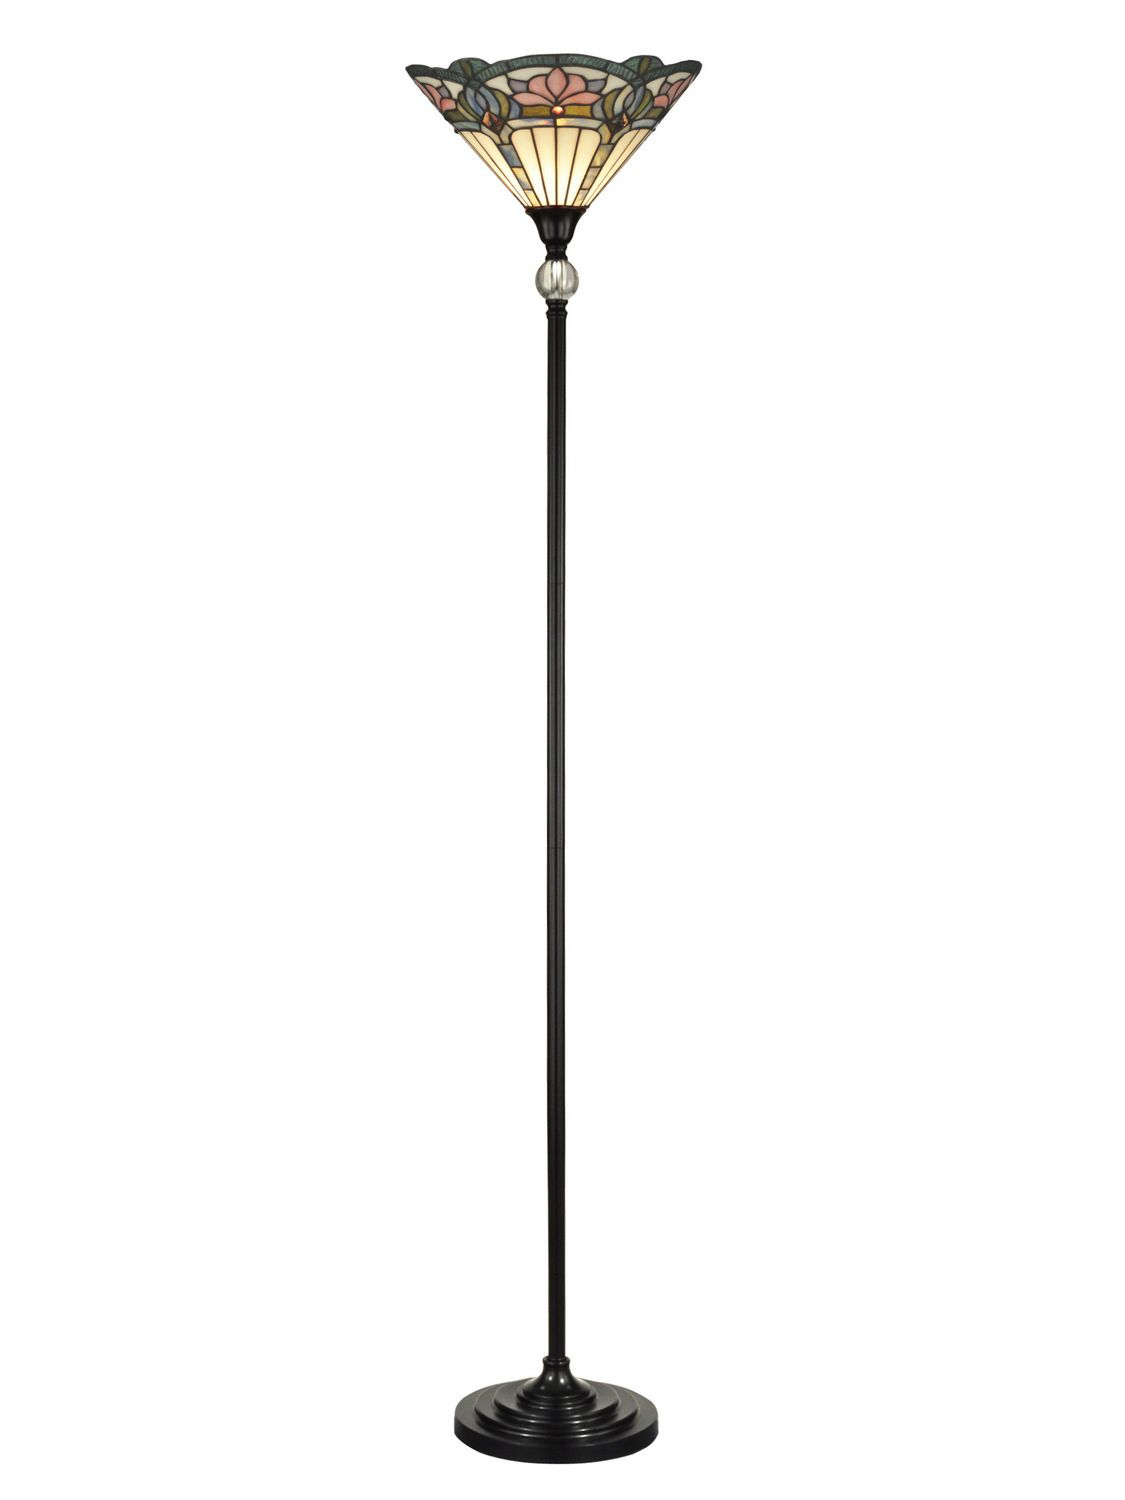 Home Lighting Fixtures At Idlewood Anewhaven Ideas intended for proportions 1125 X 1500